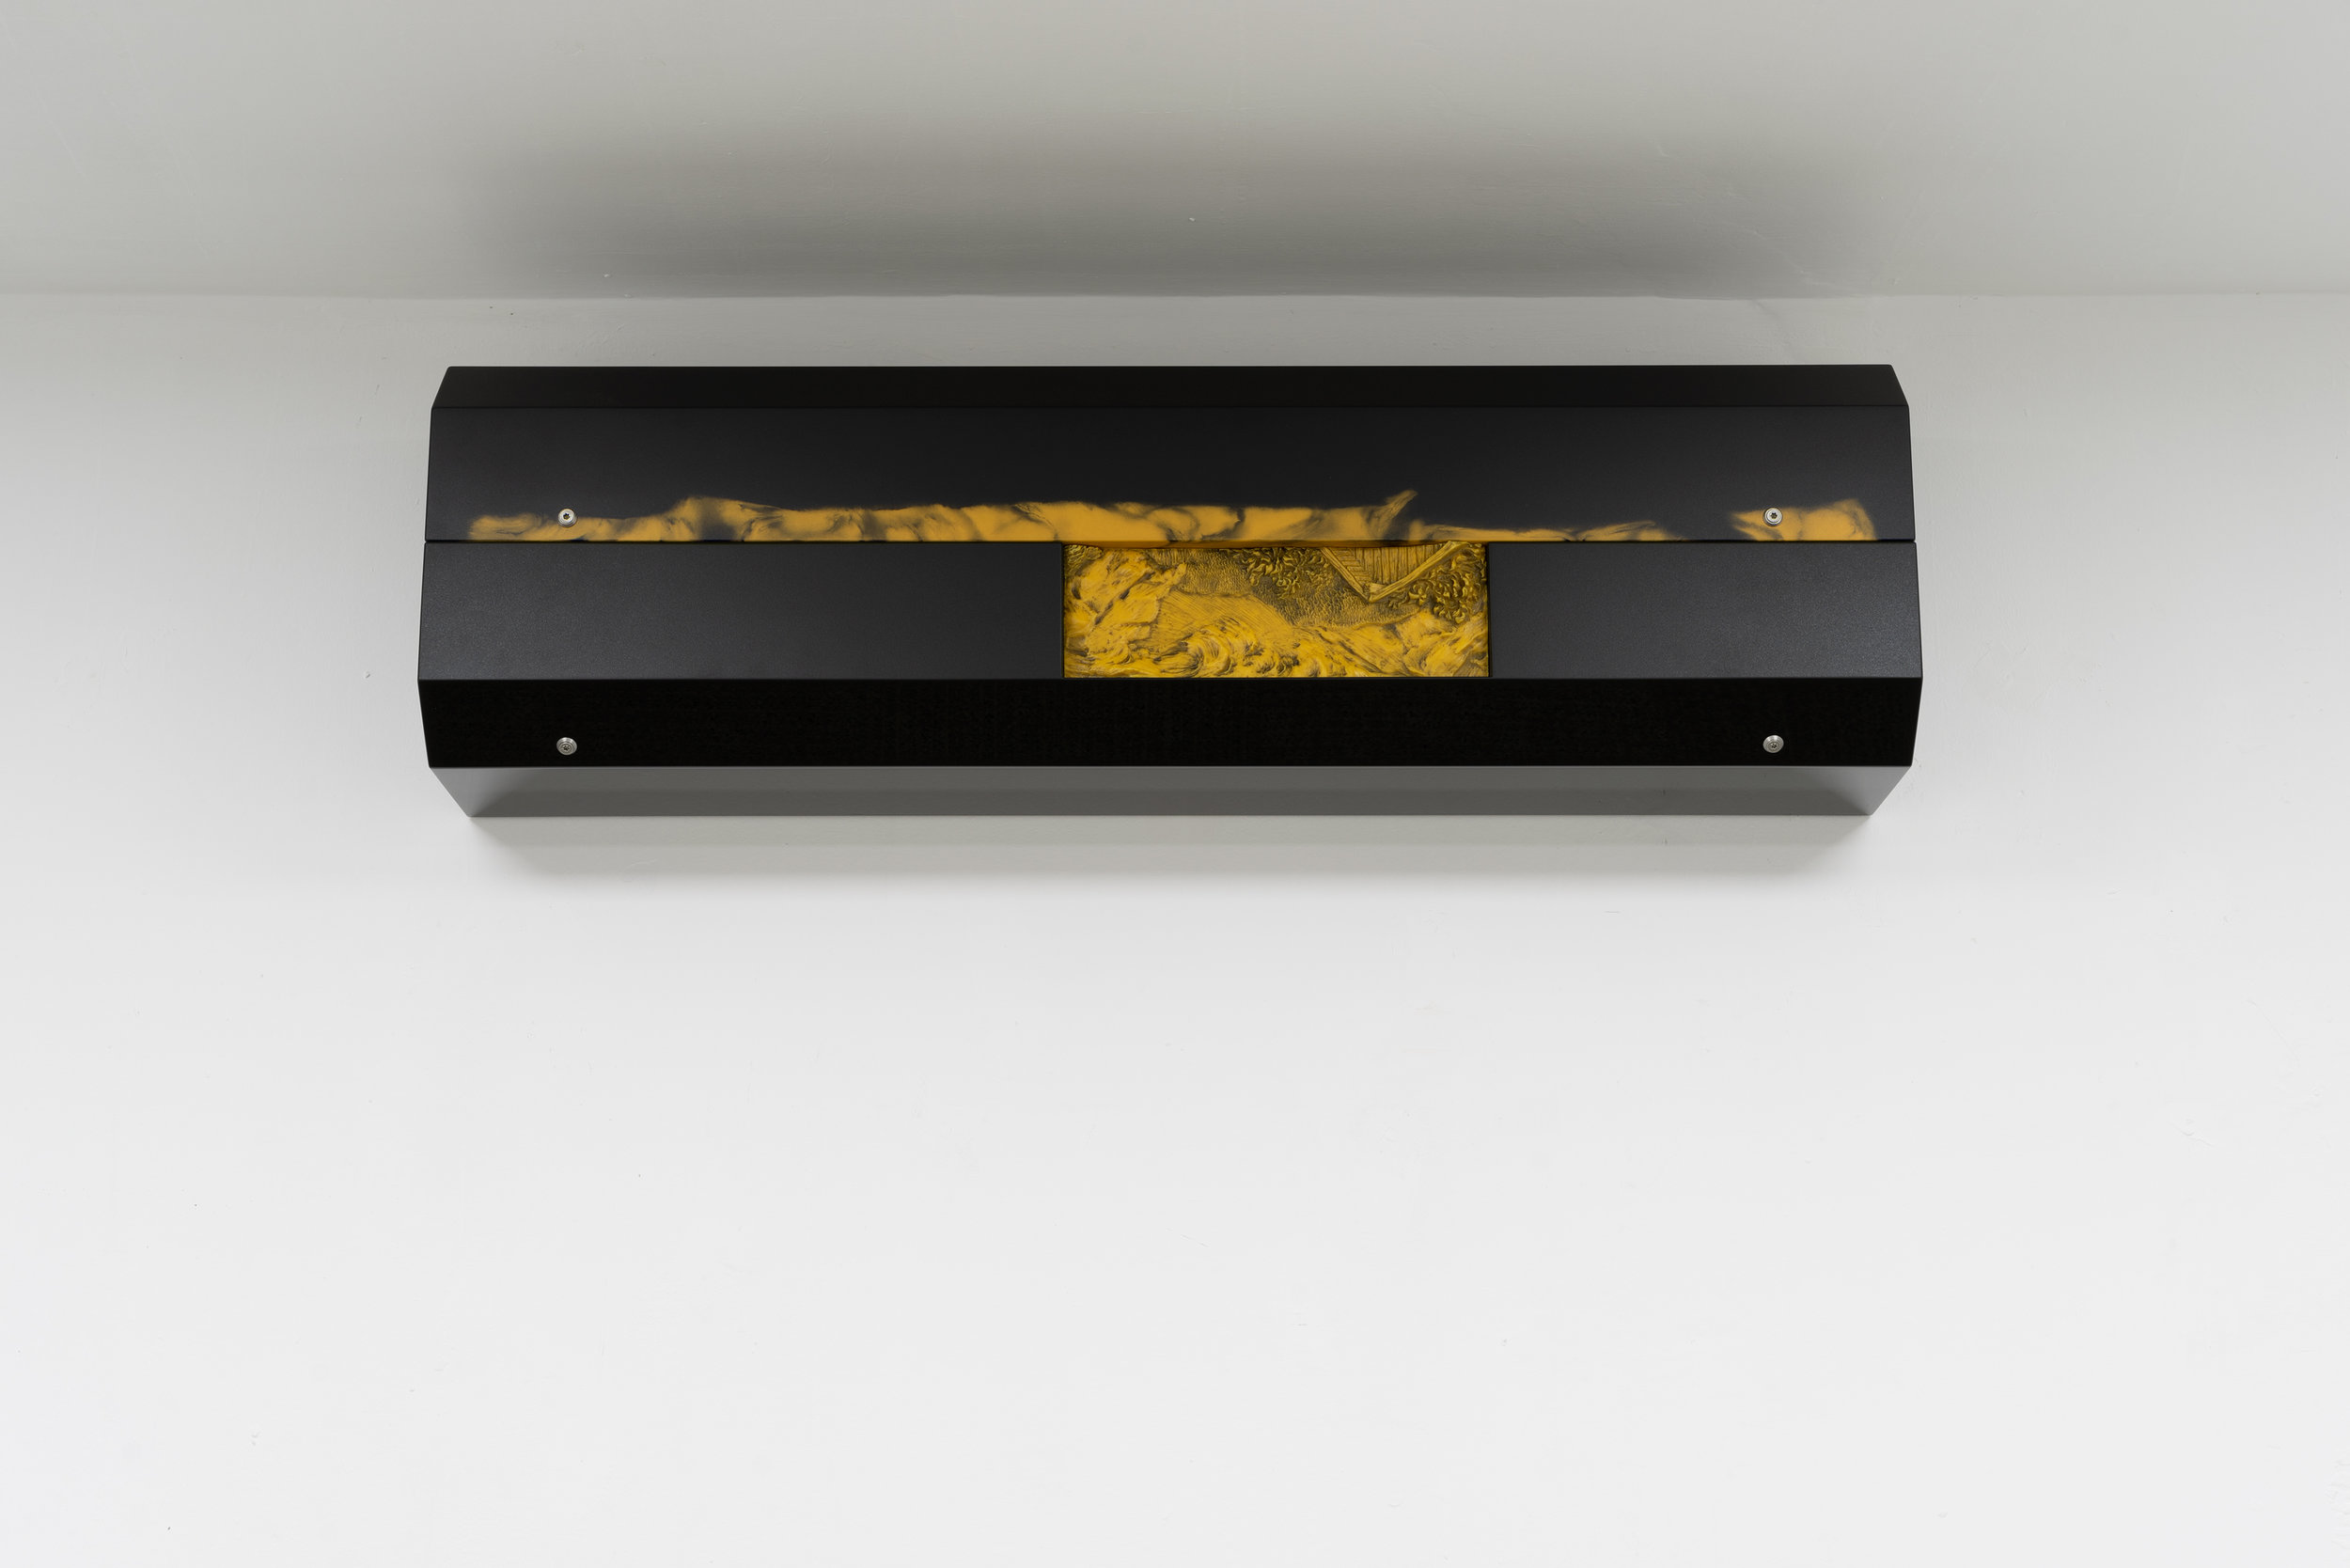  Philip Seibel,  Radiator (The Yellow Mill),  2019, 104 x 30 x 20 cm, Mdf, found and altered wax relief, PUR paint, UP resin, oil paint, screws 